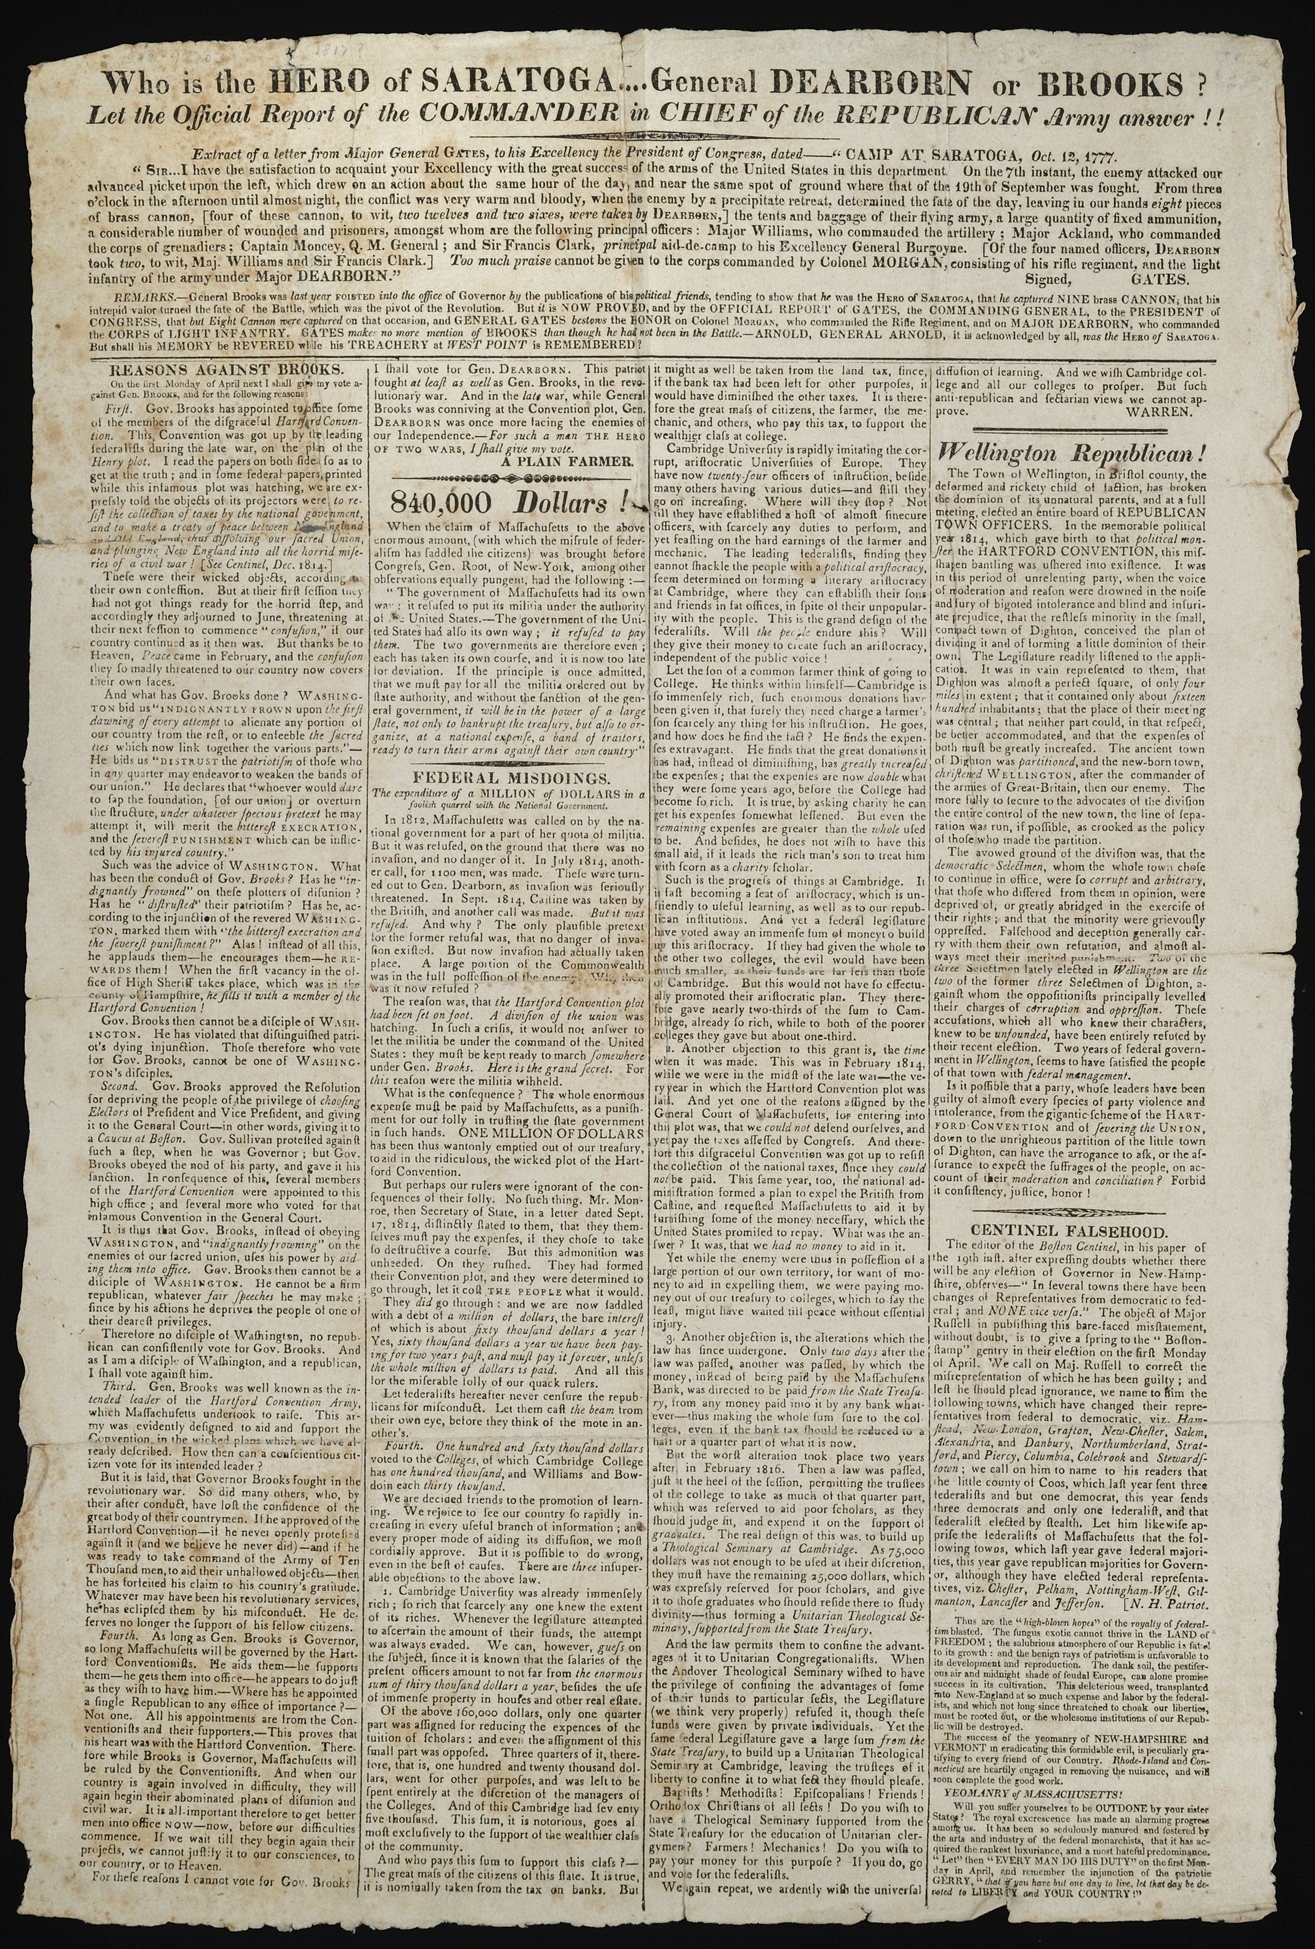 Who Is the Hero of Saratoga….General Dearborn or Brooks? Let the Official Report of the Commander in Chief of the Republican Army Answer!! [Boston: Printed by Adams & Rhoades, 1817]